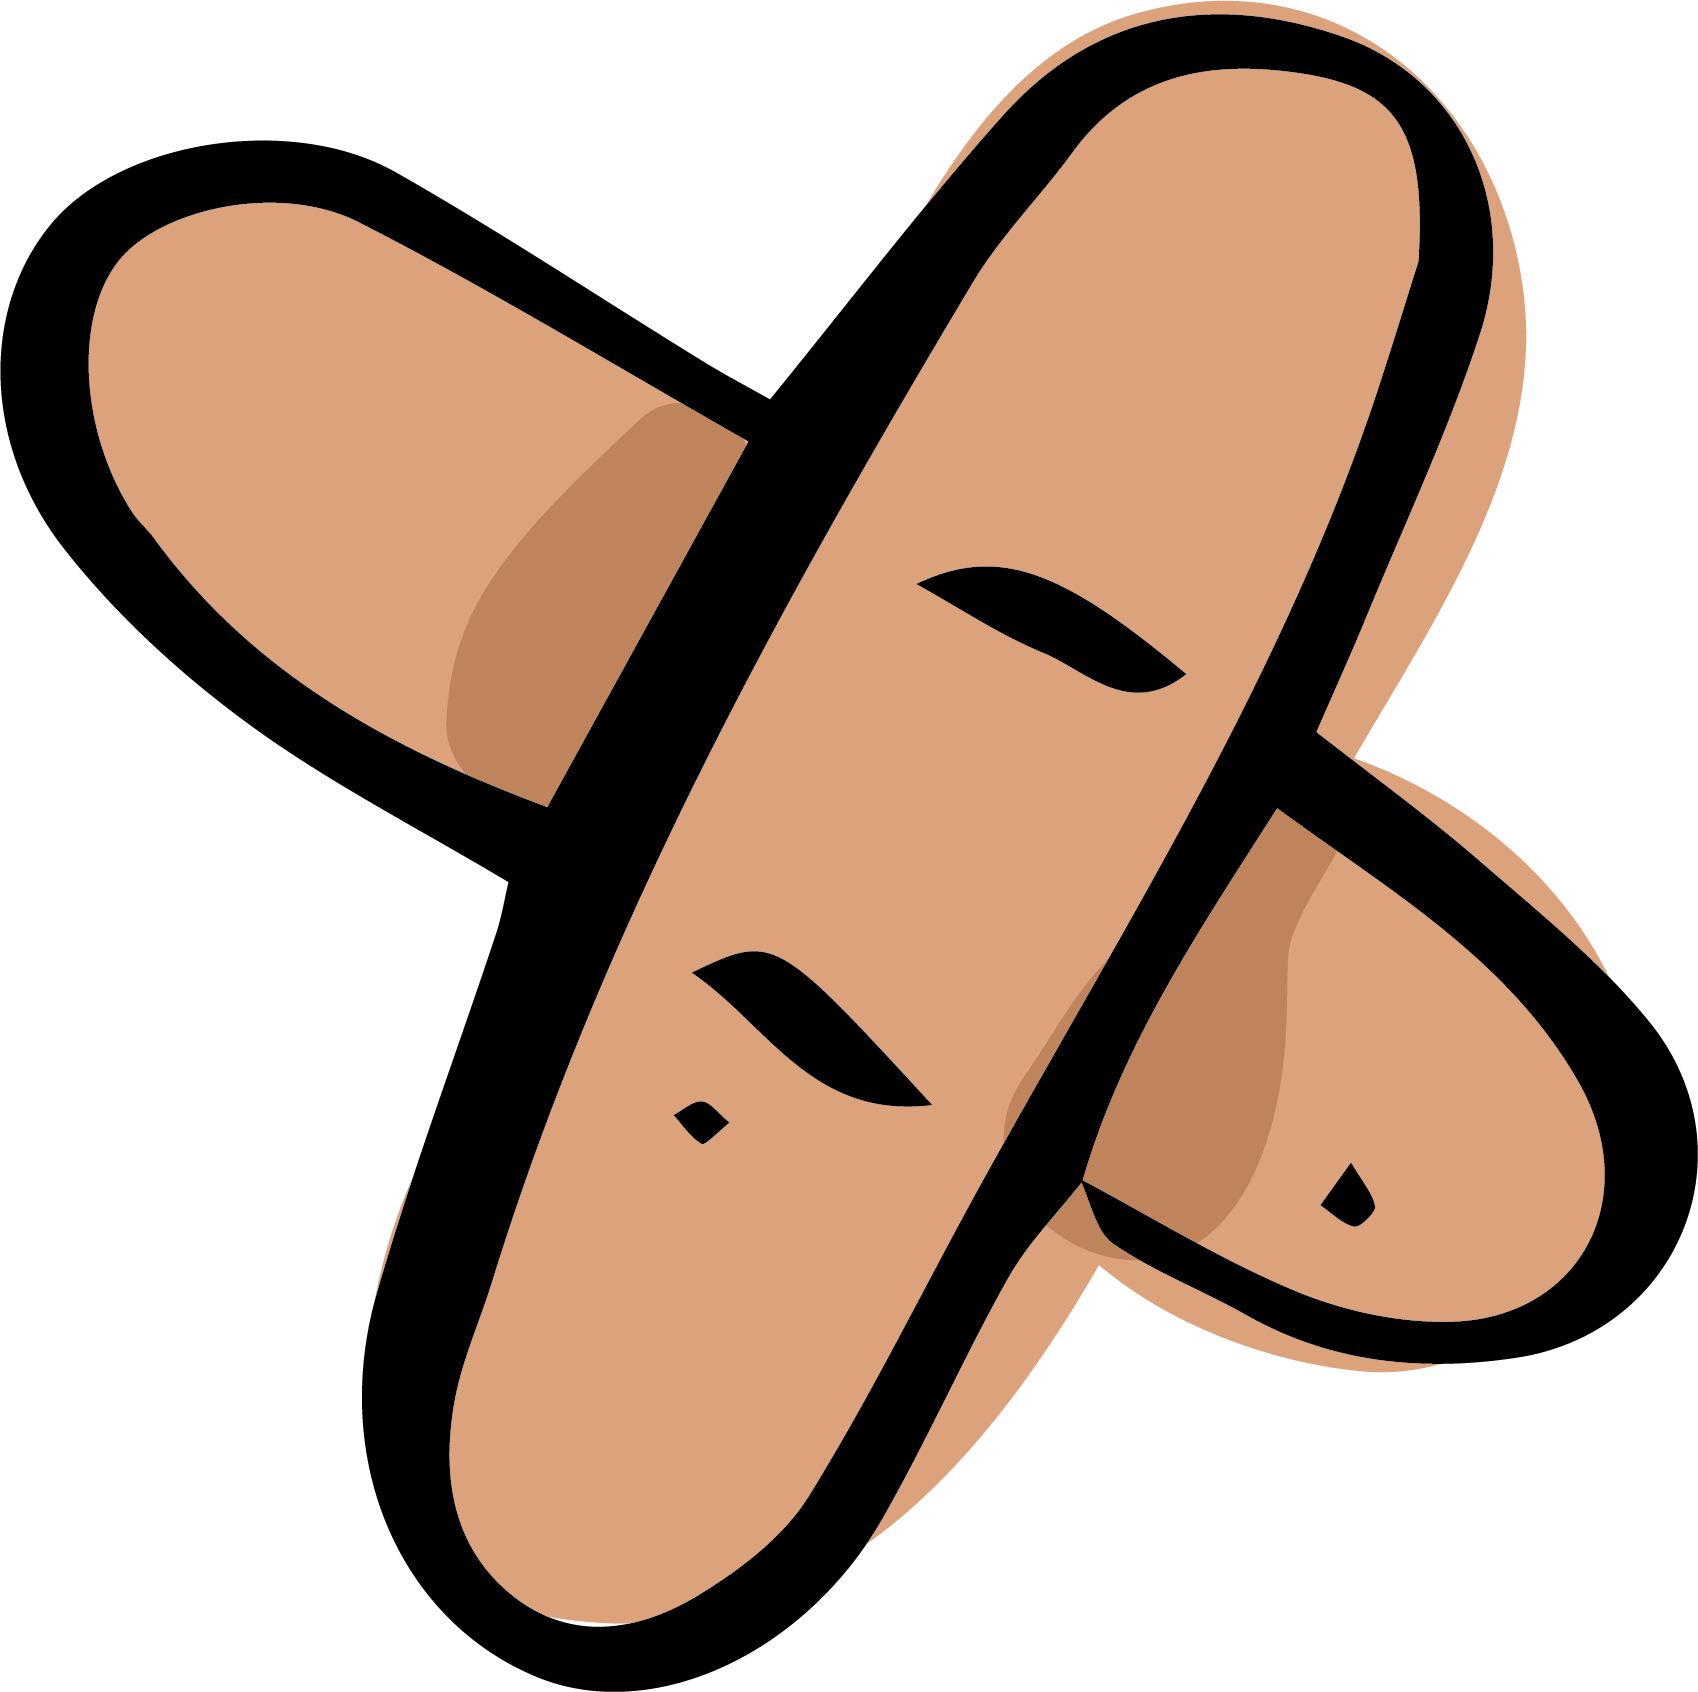 Crossed Adhesive Bandages PNG image